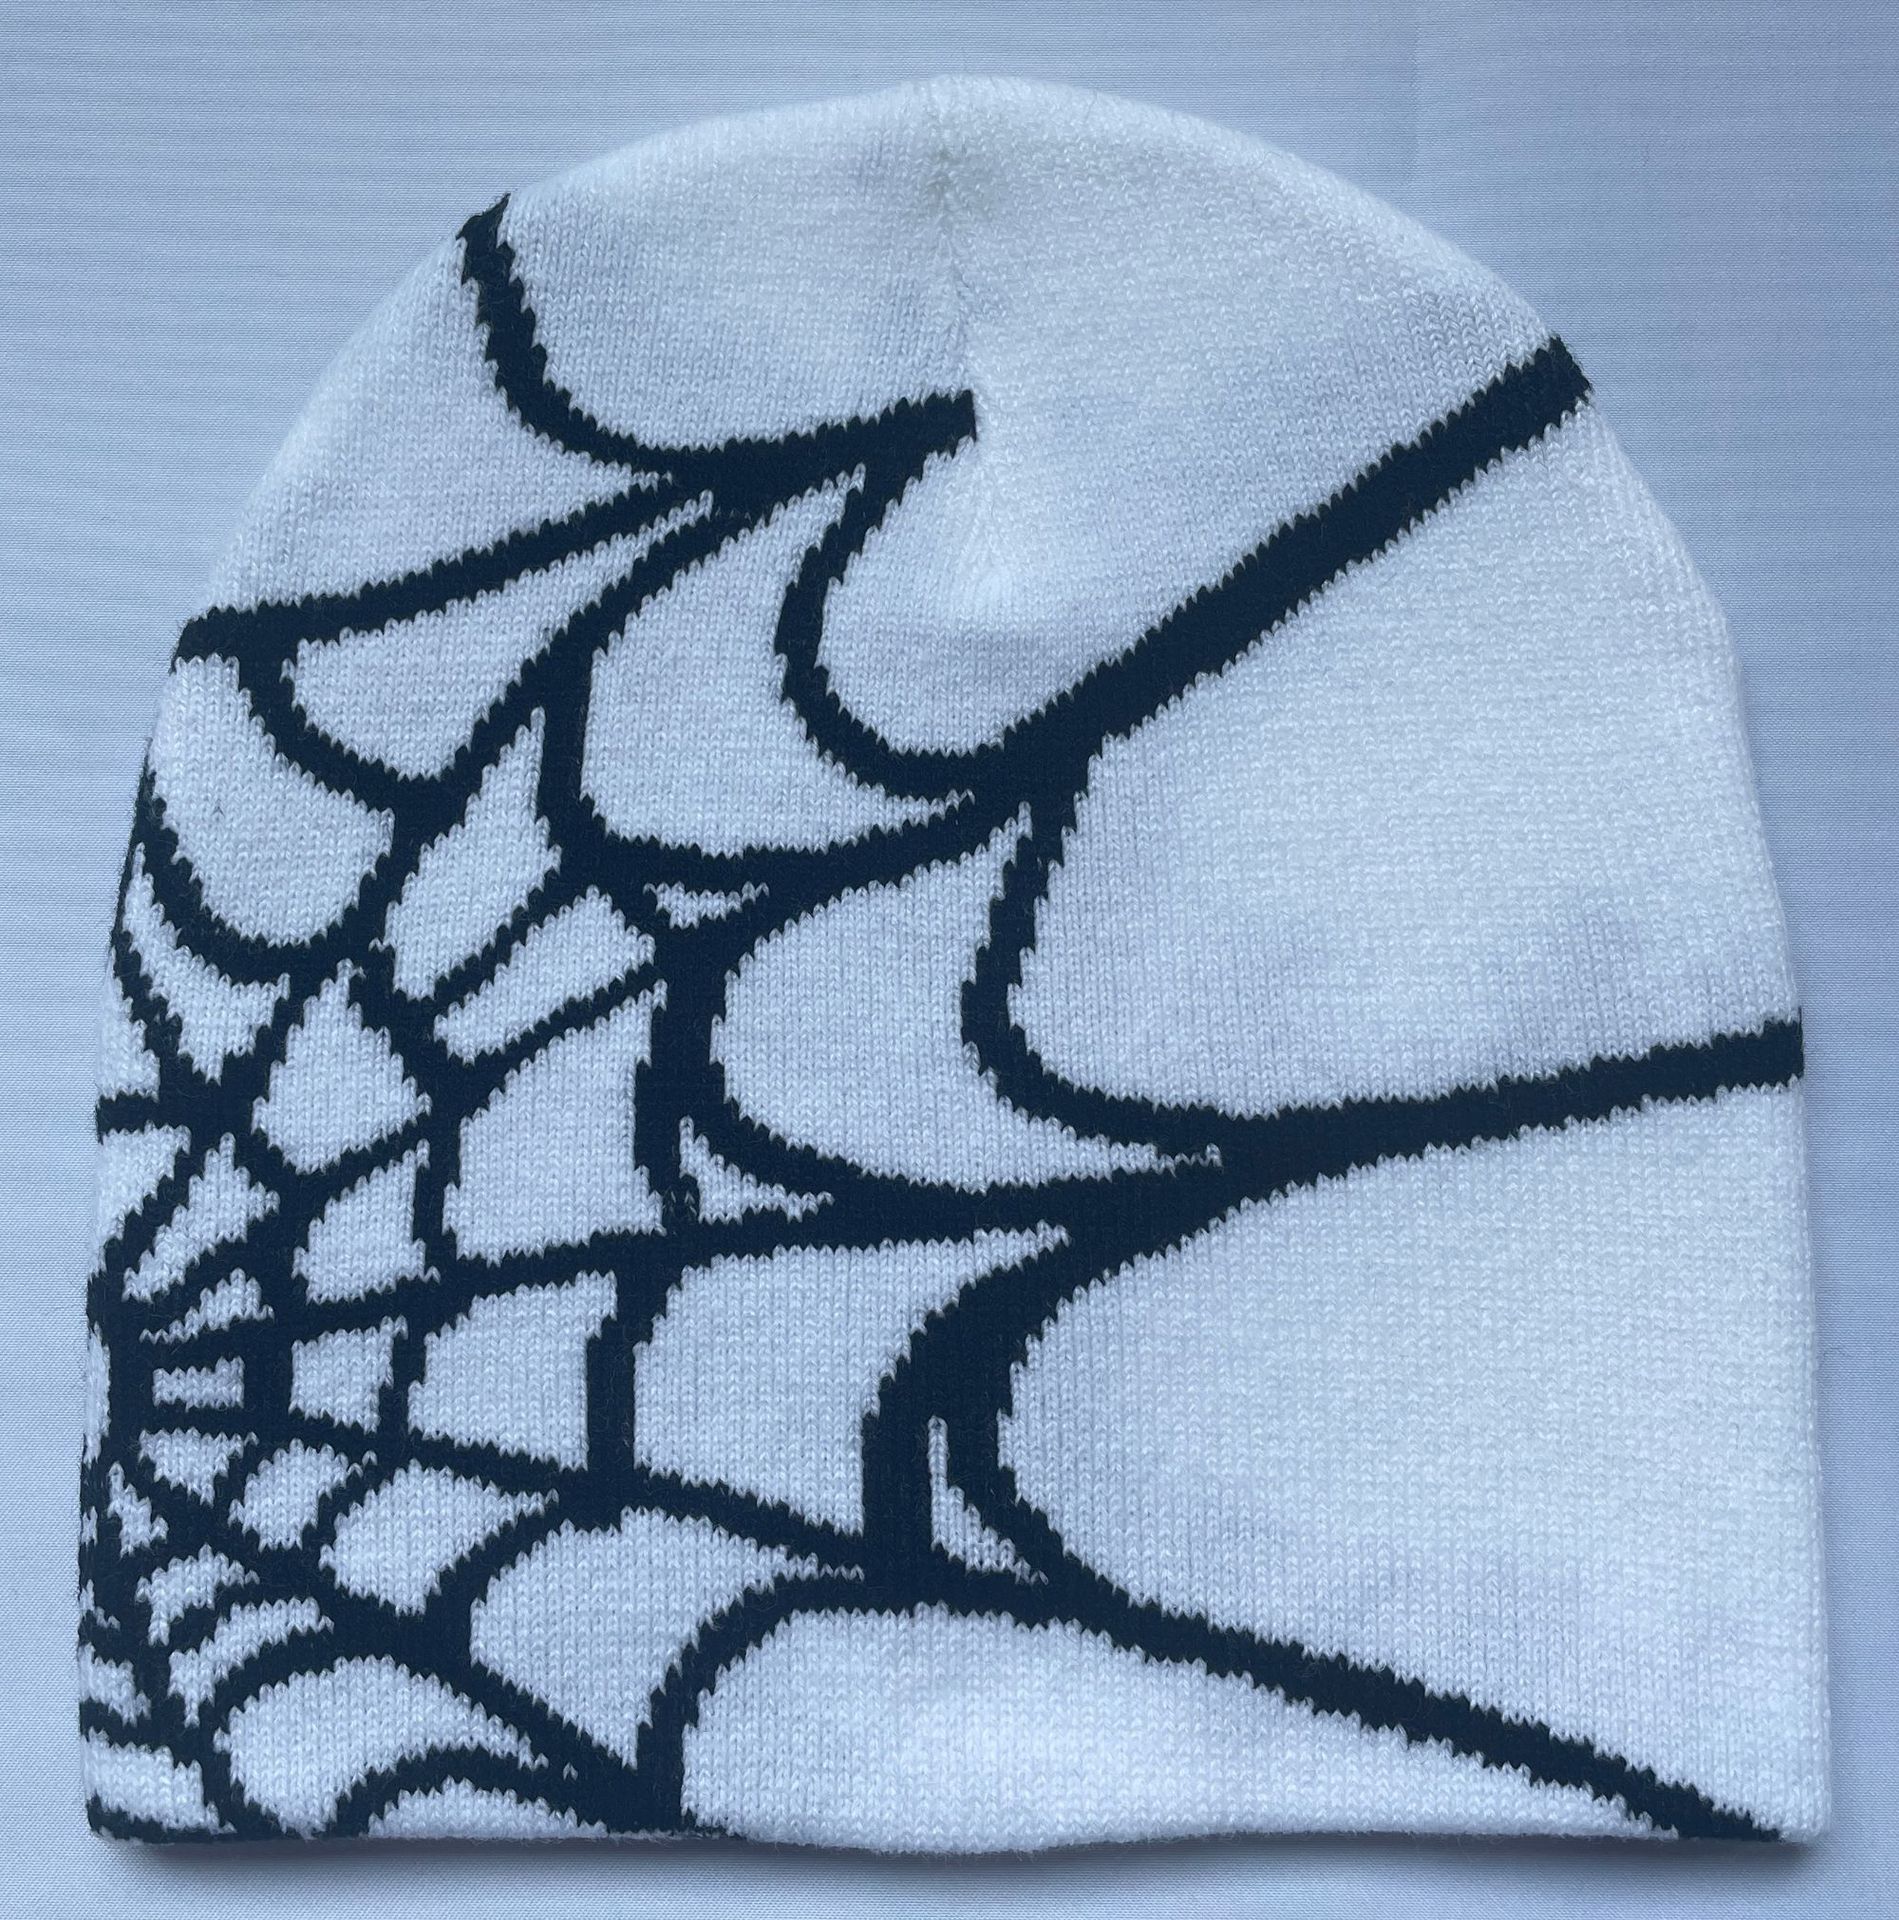 Wholesale Fashion Outdoor Riding Spider Web Jacquard Knitted Hat